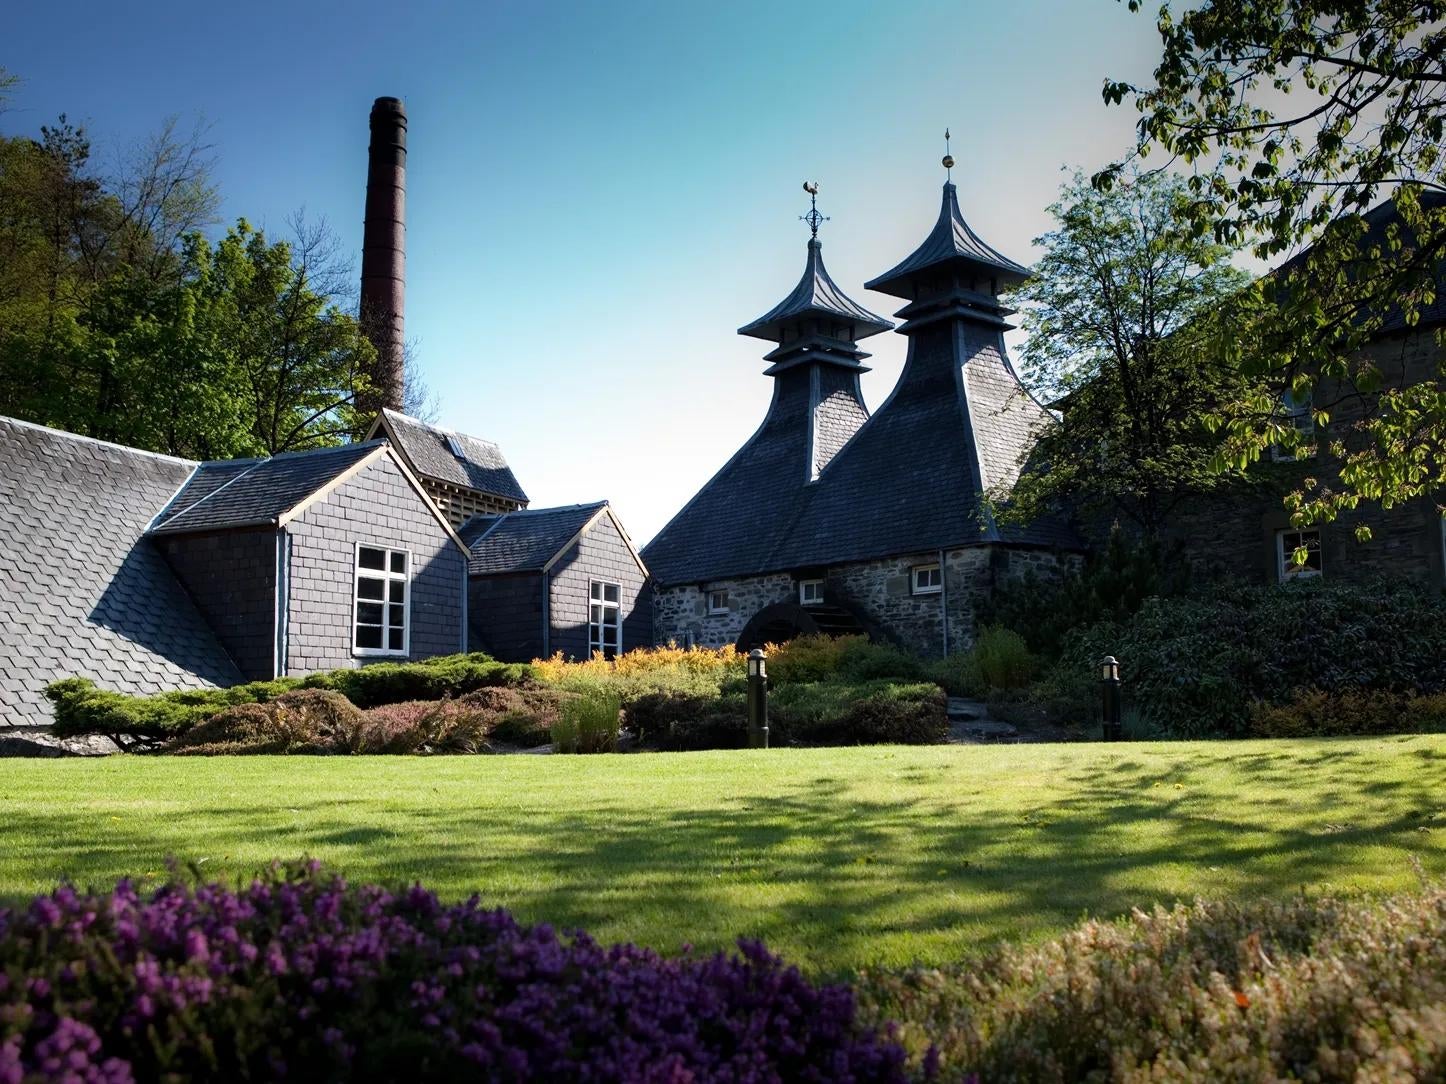 The Chivas Brothers Strathisla Distillery, located in Keith, Scotland.